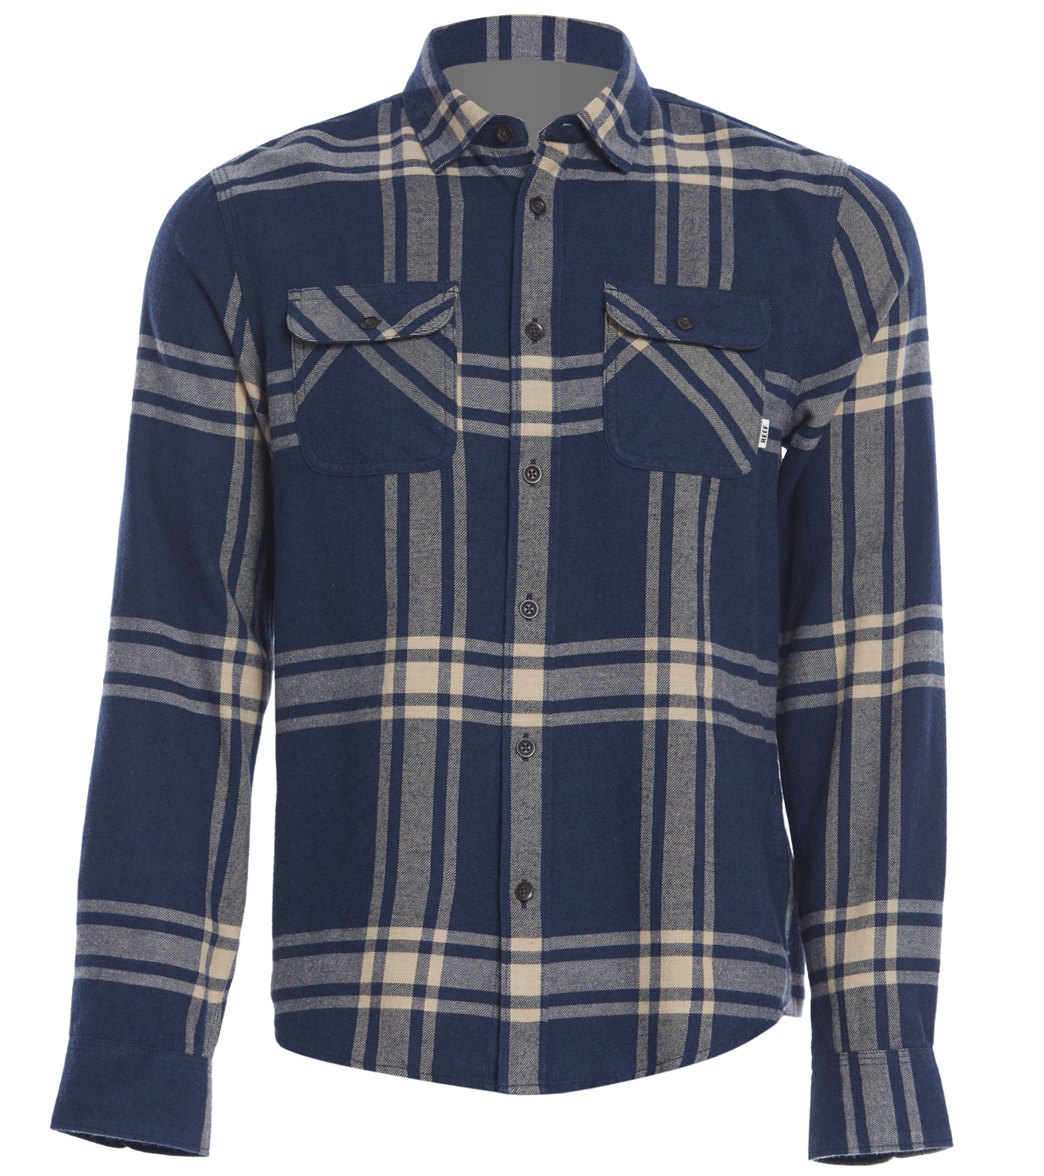 Reef Men's Cold Dip 14 Long Sleeve Shirt - Navy Heather Small Cotton - Swimoutlet.com